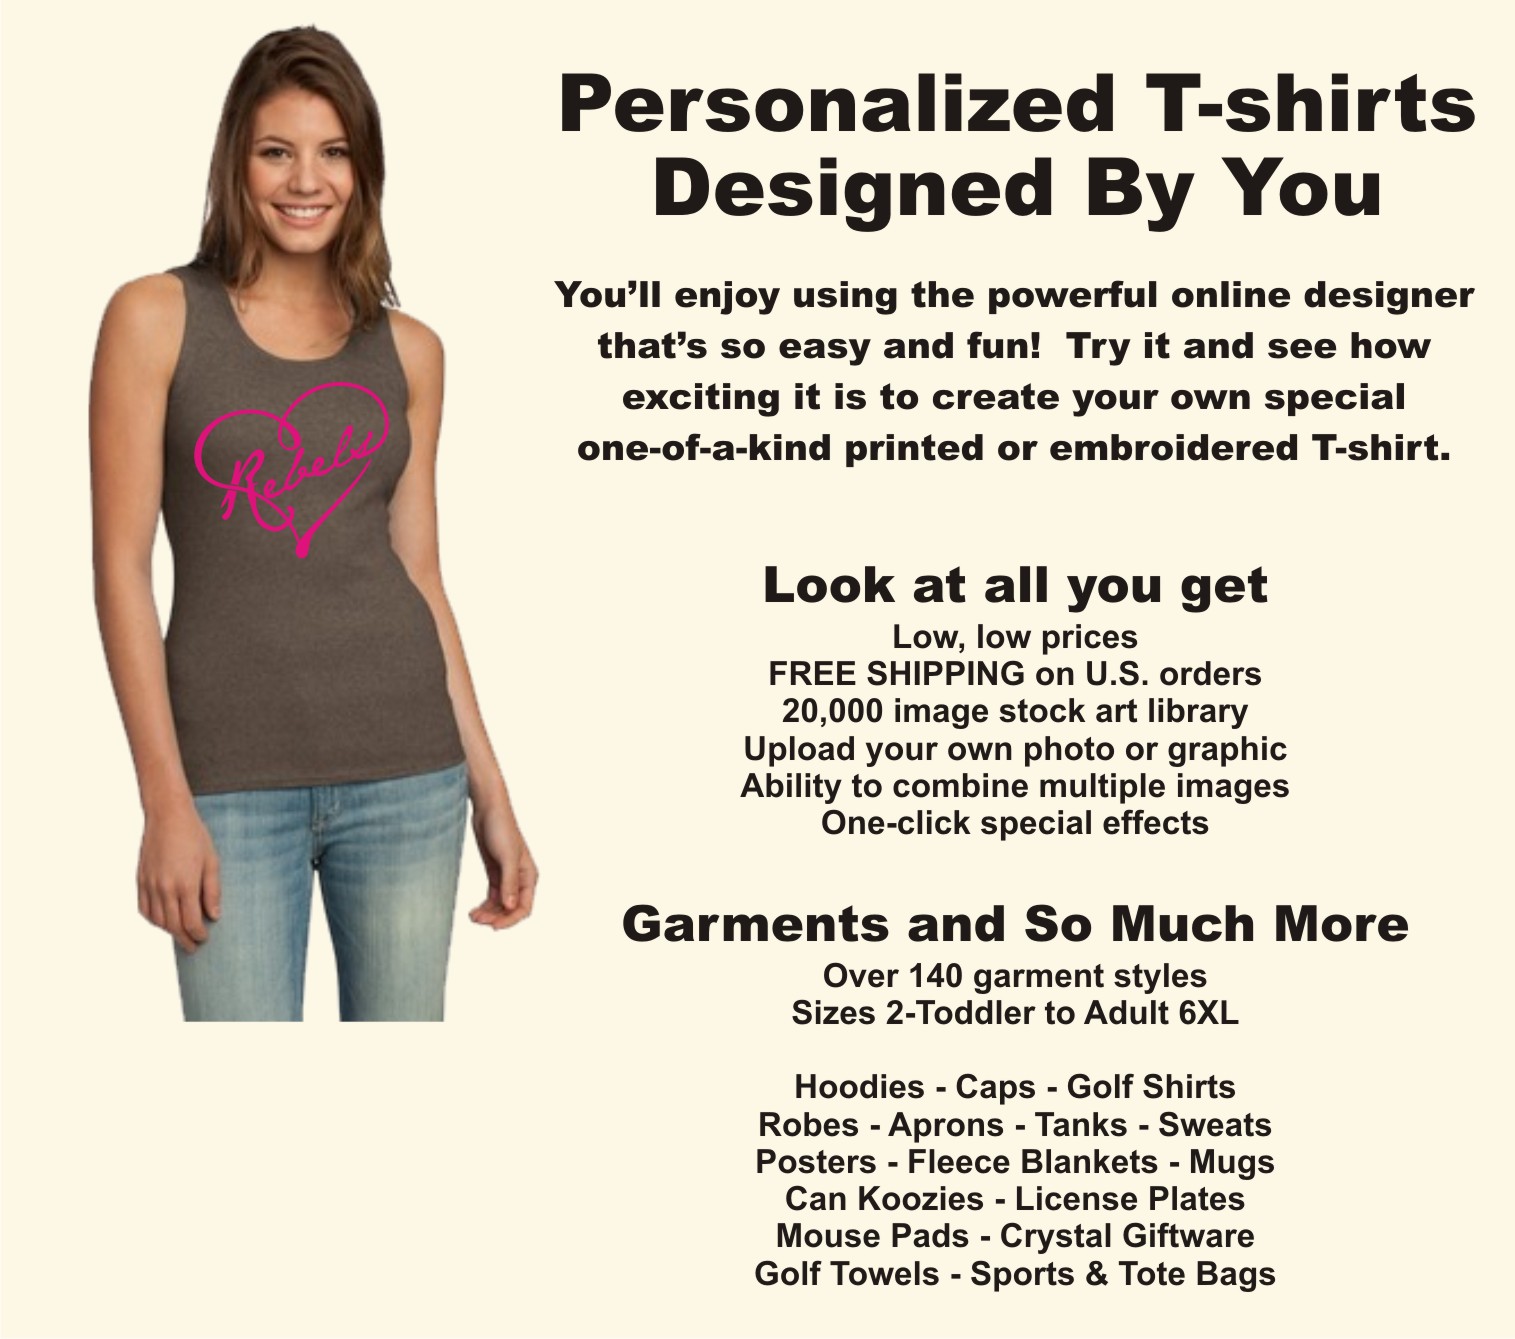 Design, personalize, create, and customize your own T-shirt or tee shirt.